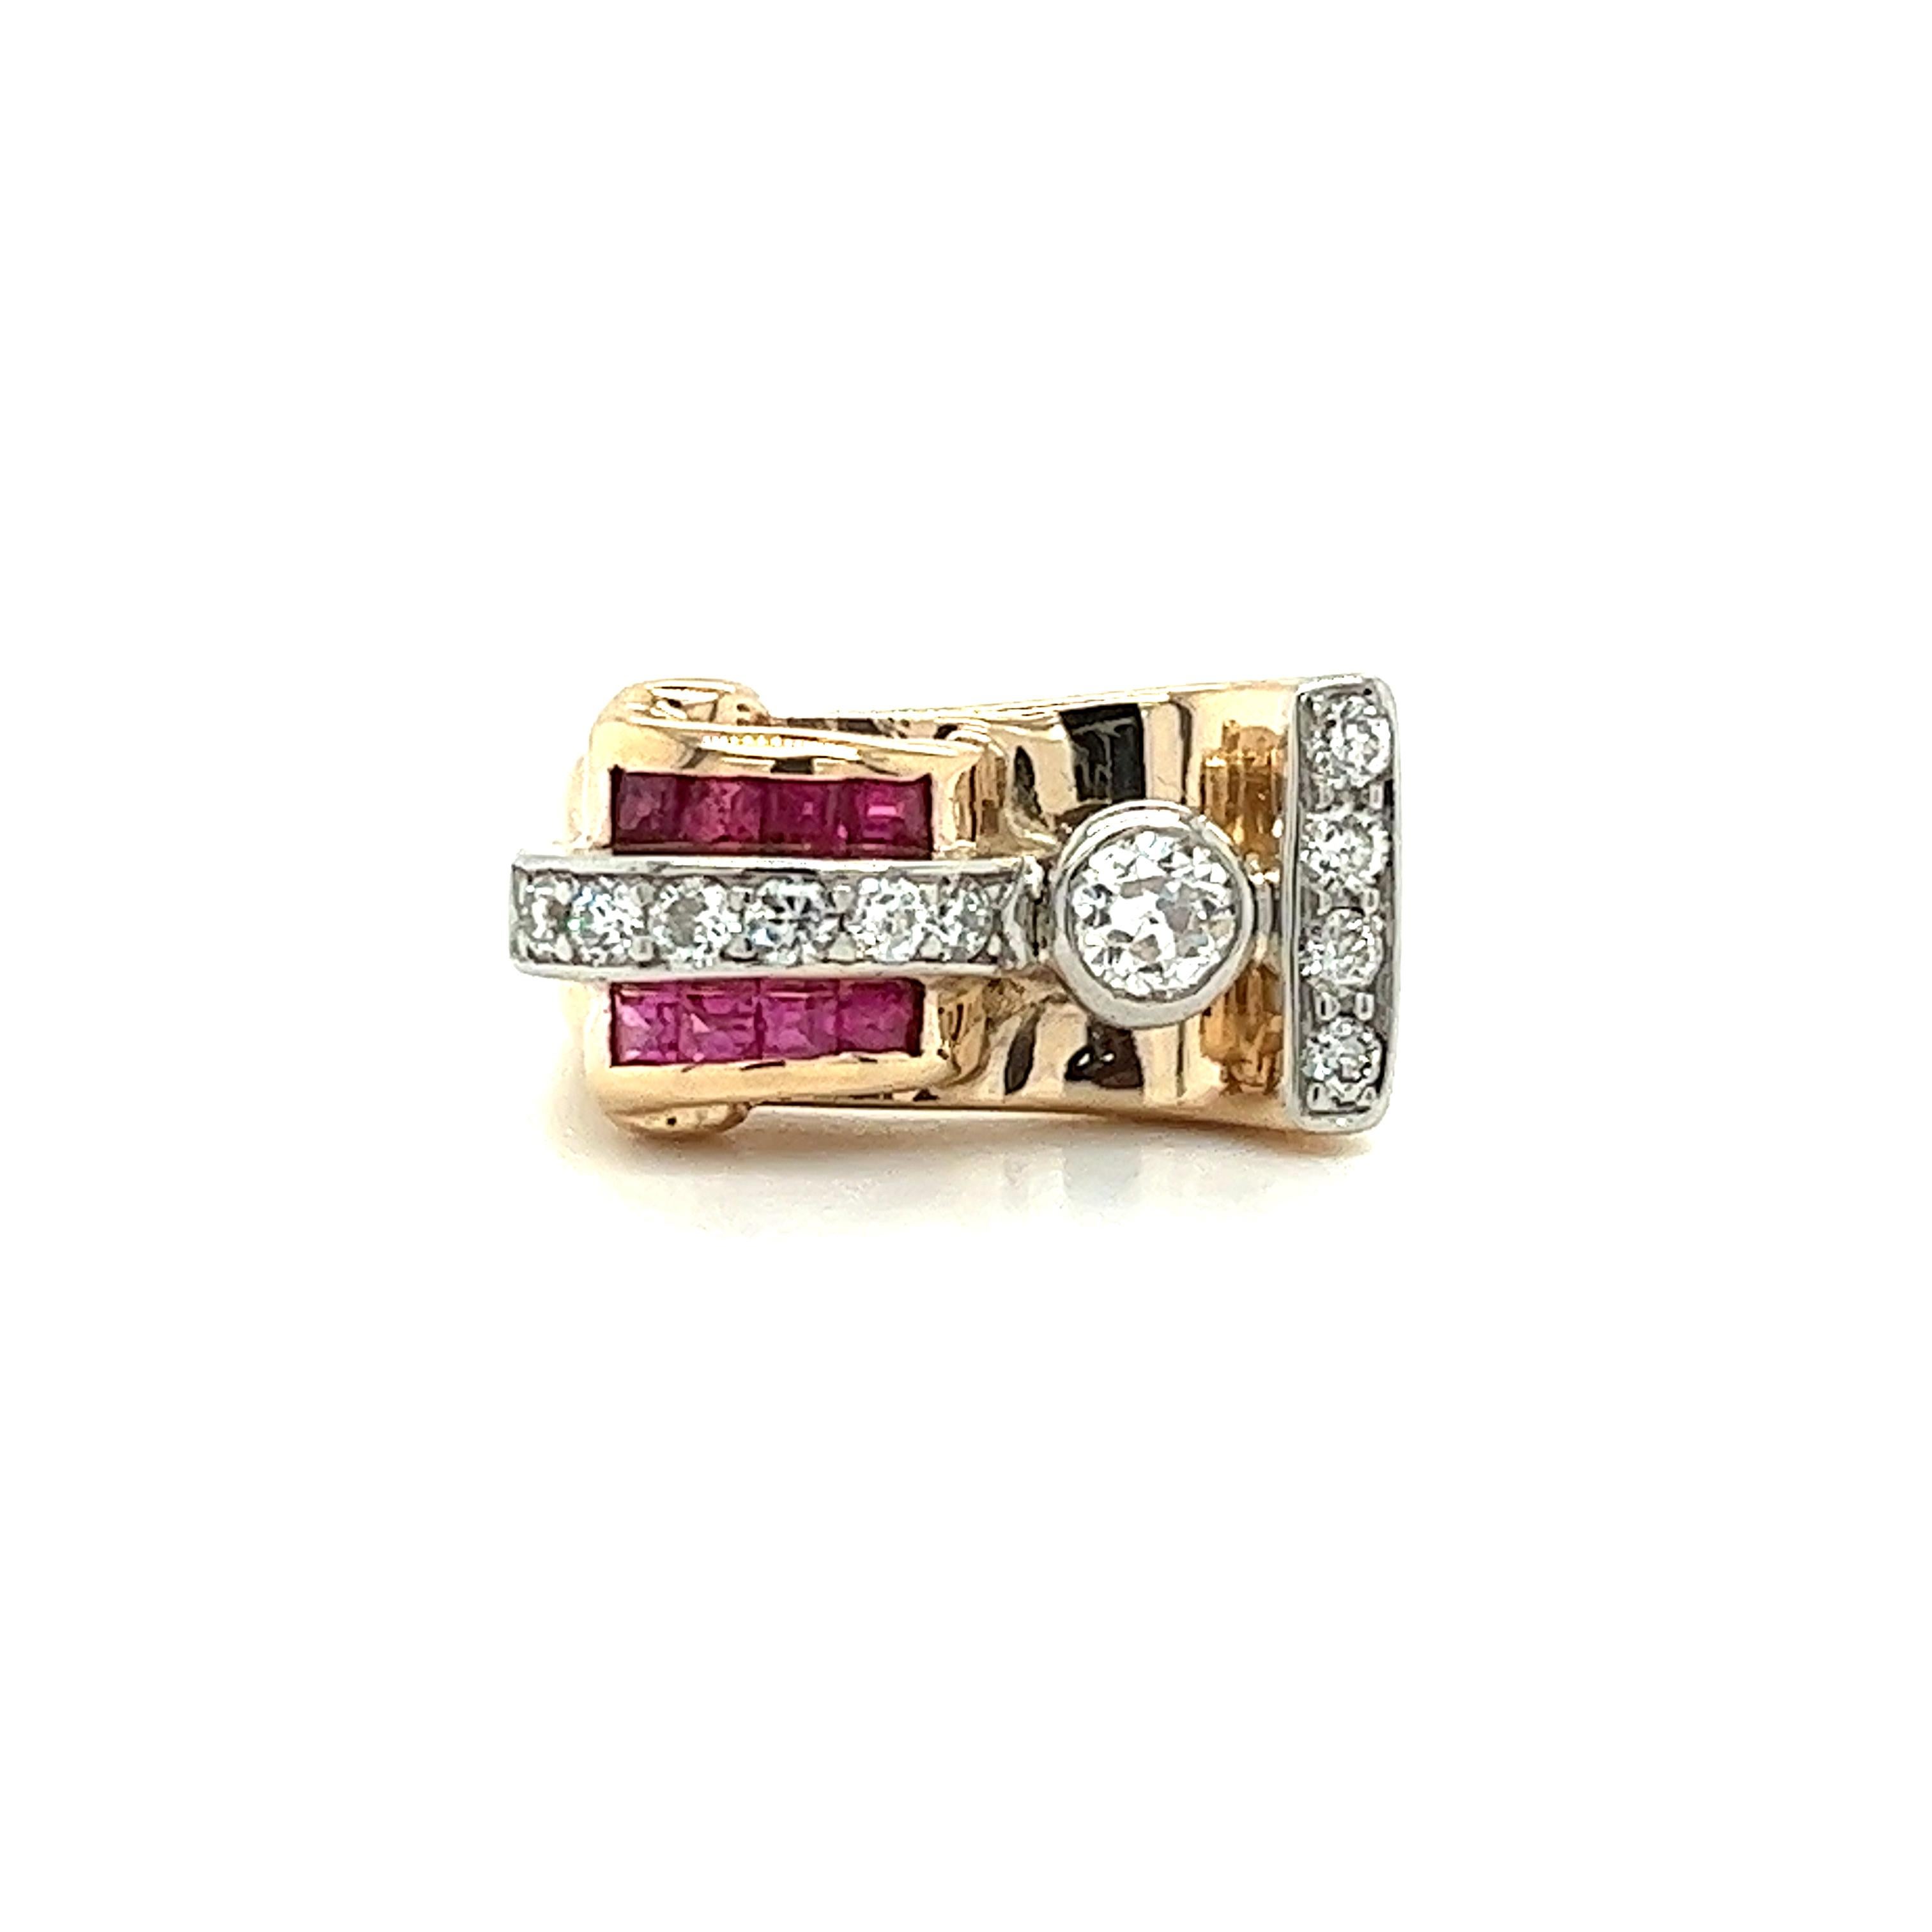 Vintage 14k Gold Retro Style Old Euro Cut Diamond and Baguette Cut Ruby Ring For Sale 2